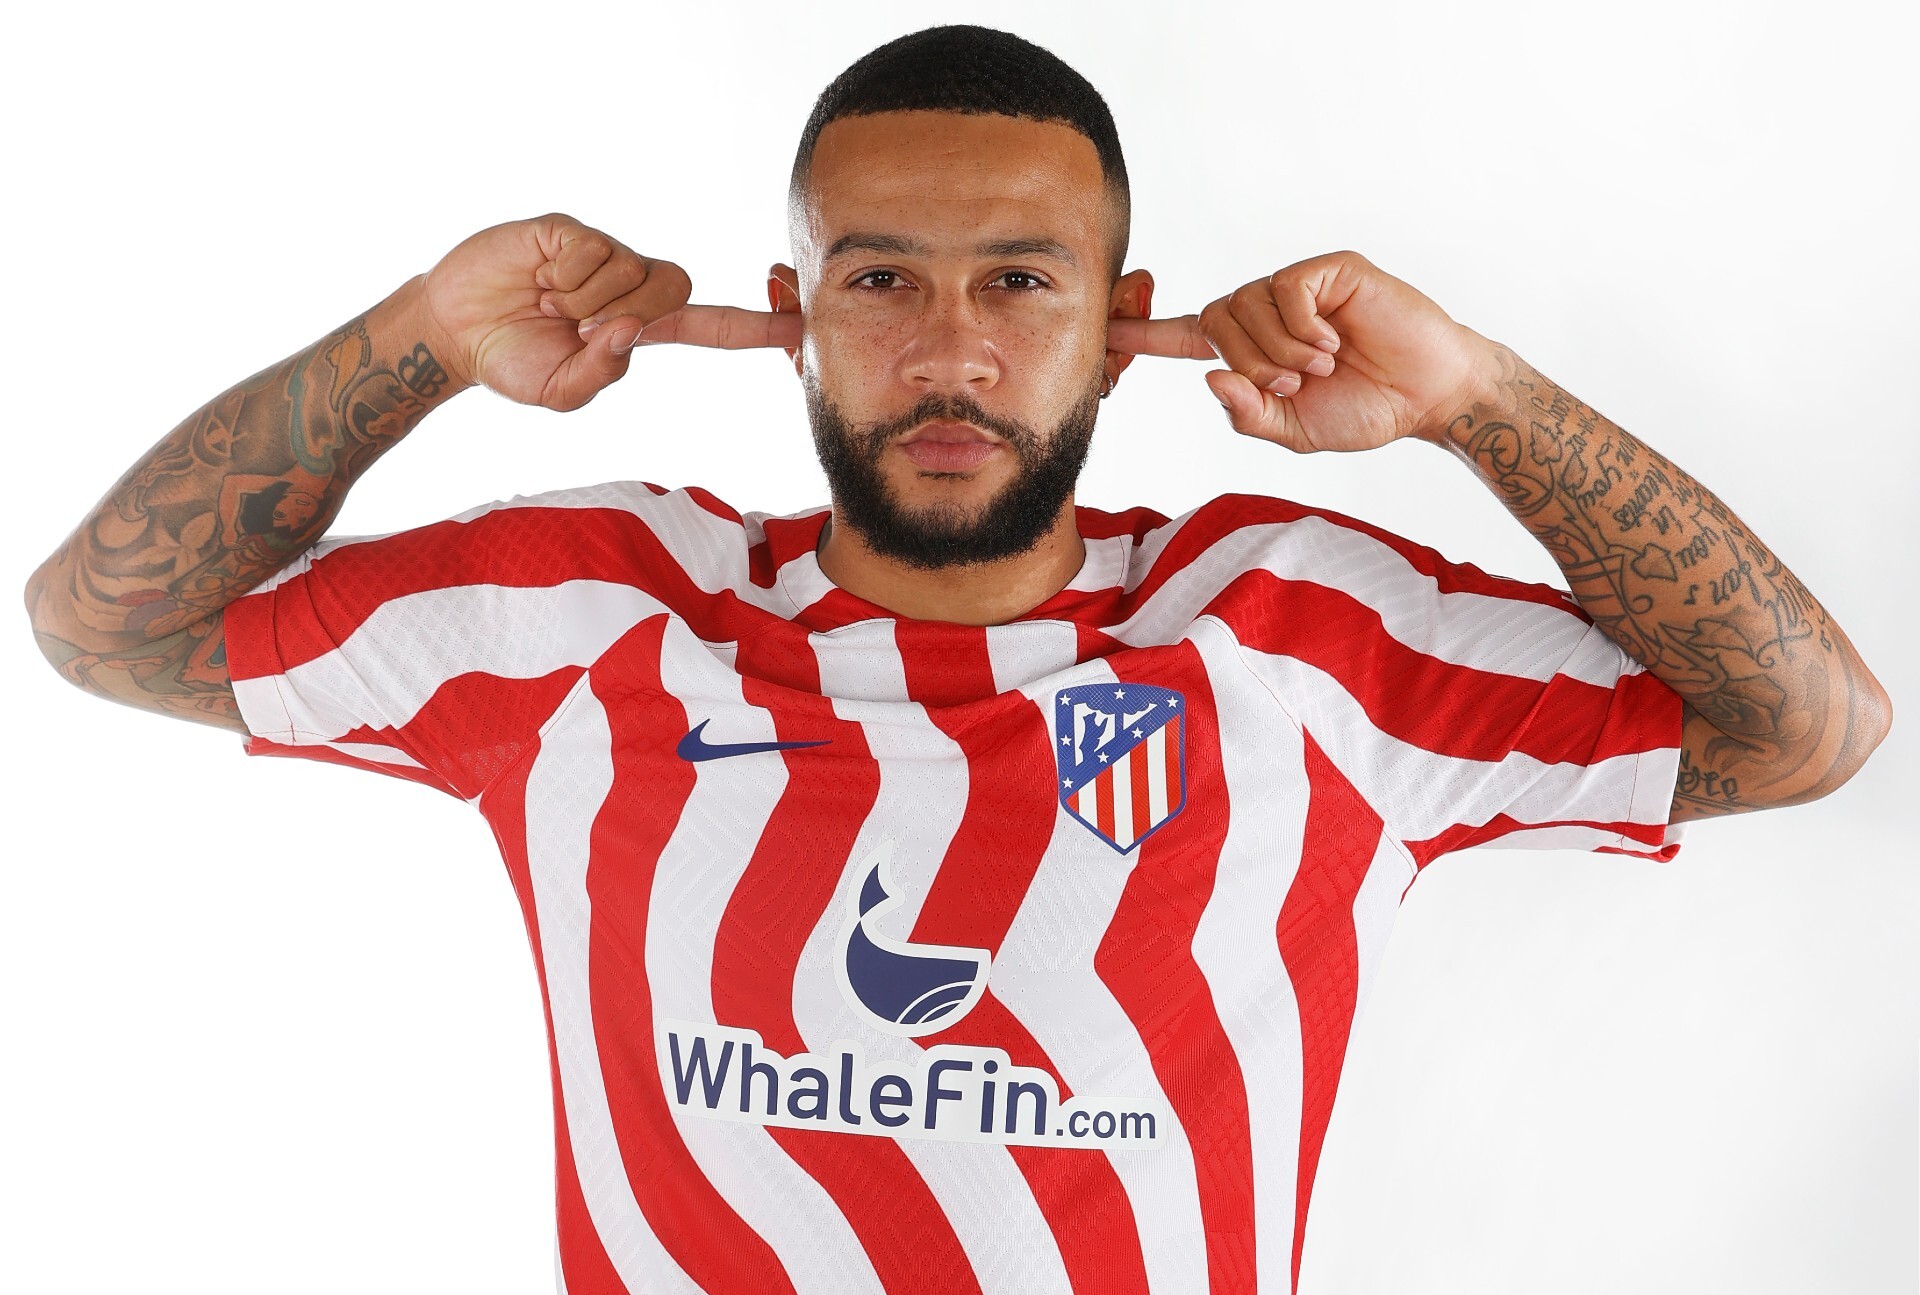 Memphis Depay: Five Things You may not know about the Atletico Madrid  striker - myKhel